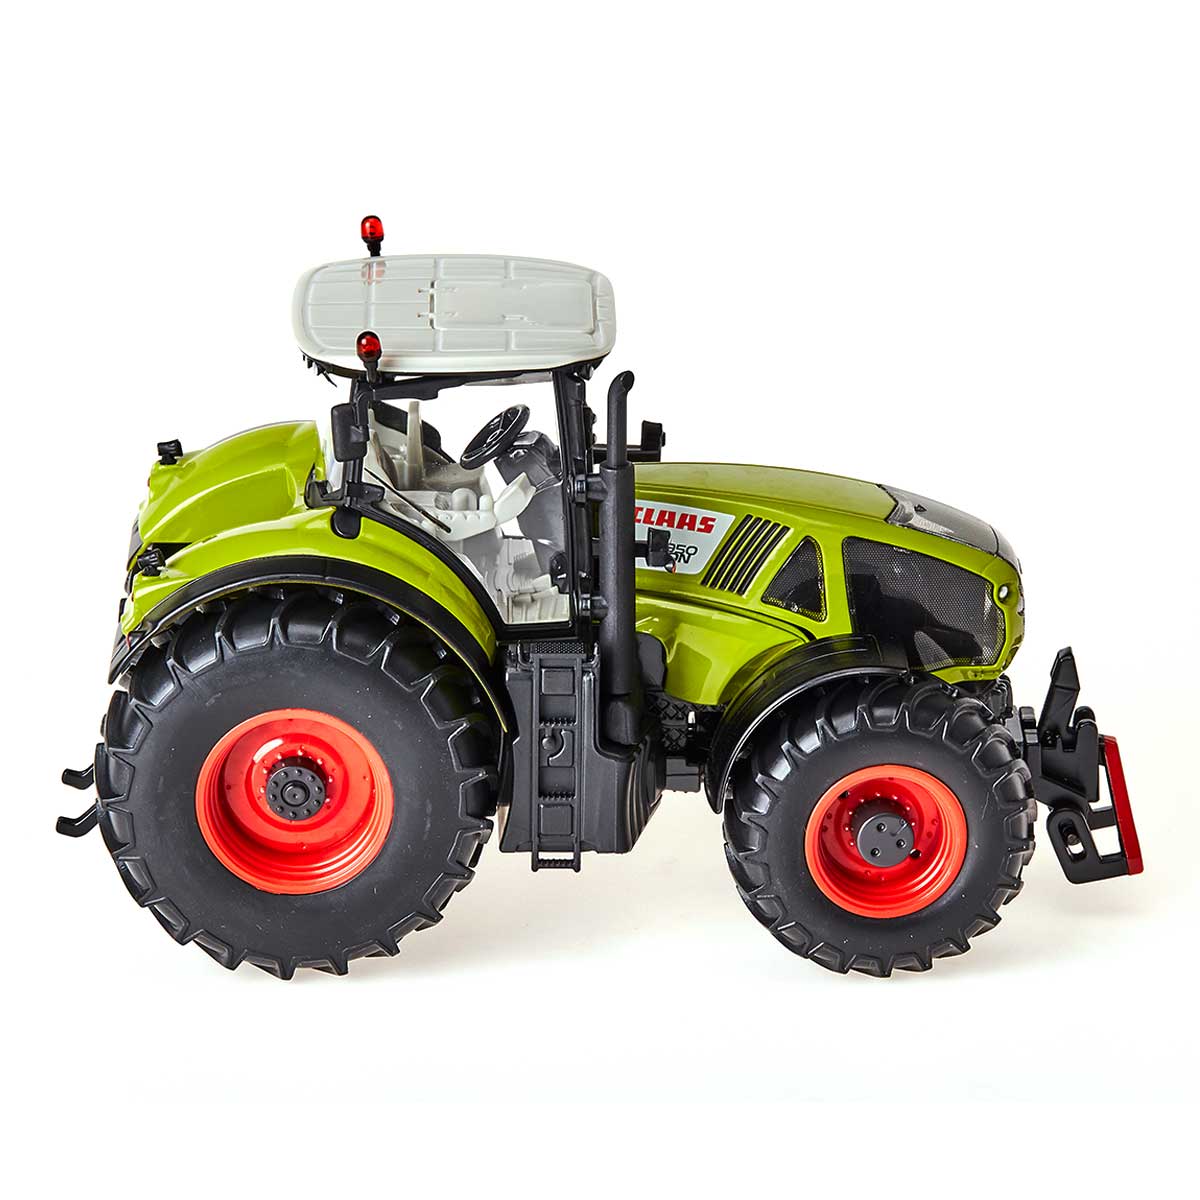 Claas アキシオン950